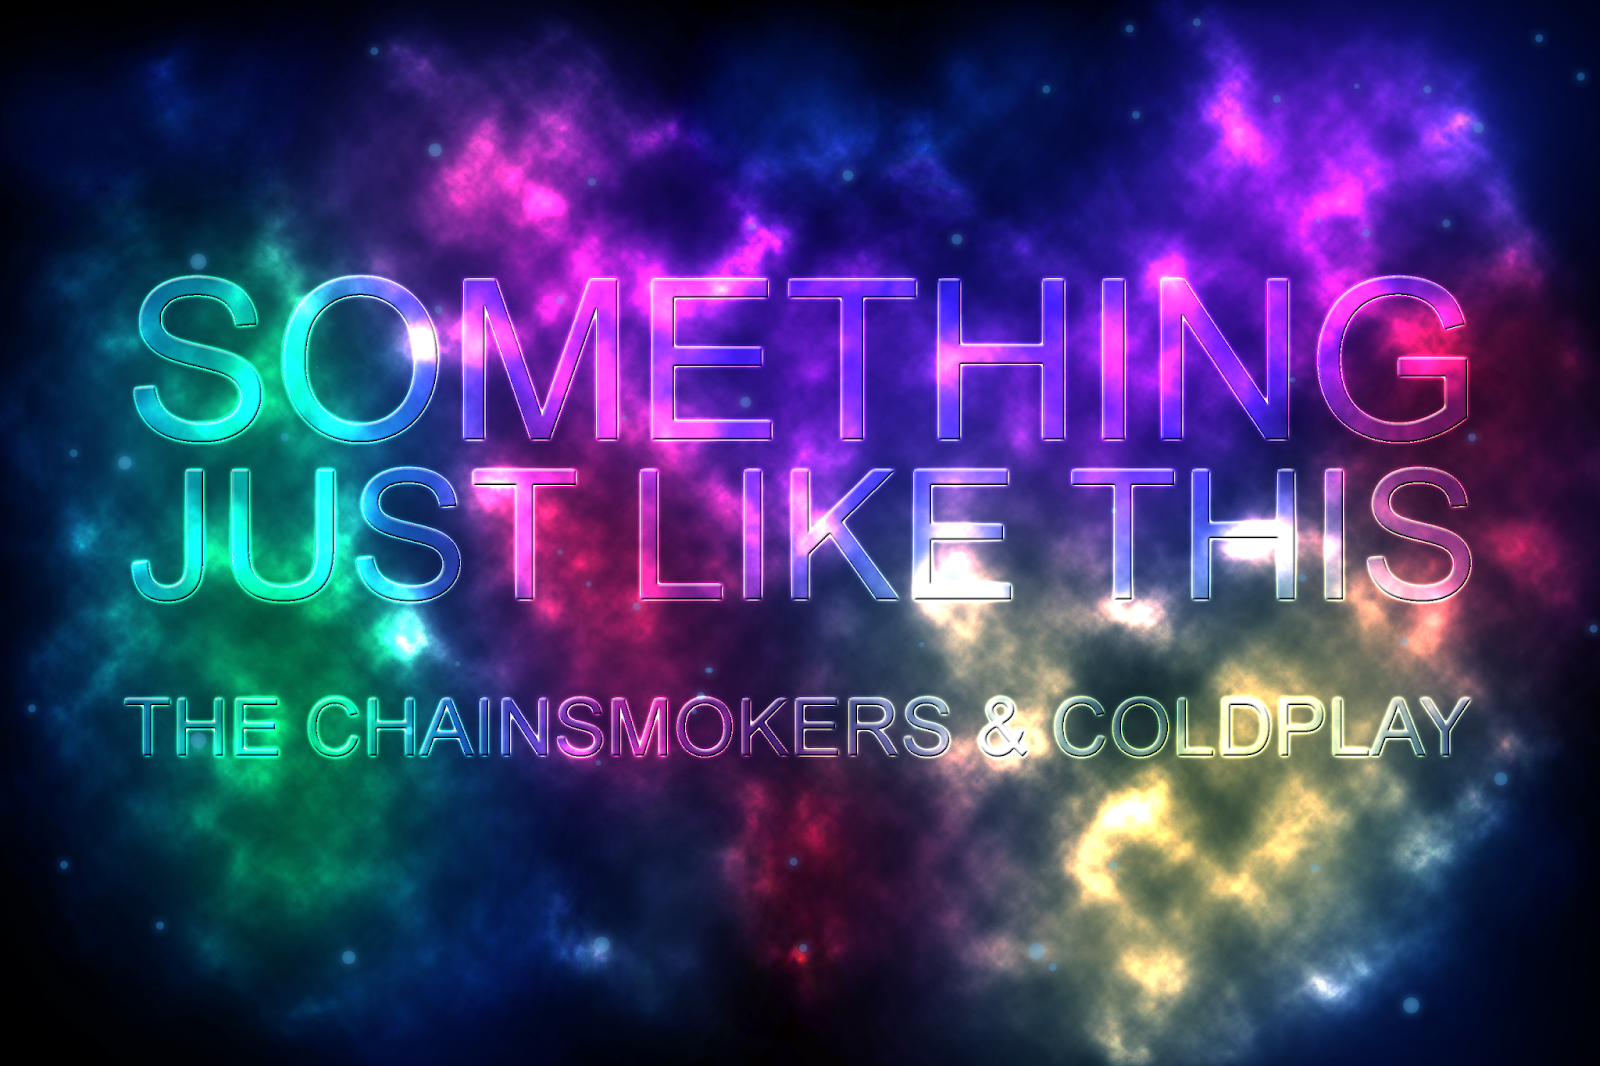 The Chainsmokers Coldplay. Coldplay & the Chainsmokers солист. The Chainsmokers Coldplay something just like this. The Chainsmokers something just like this Lyrics. The chainsmokers coldplay something